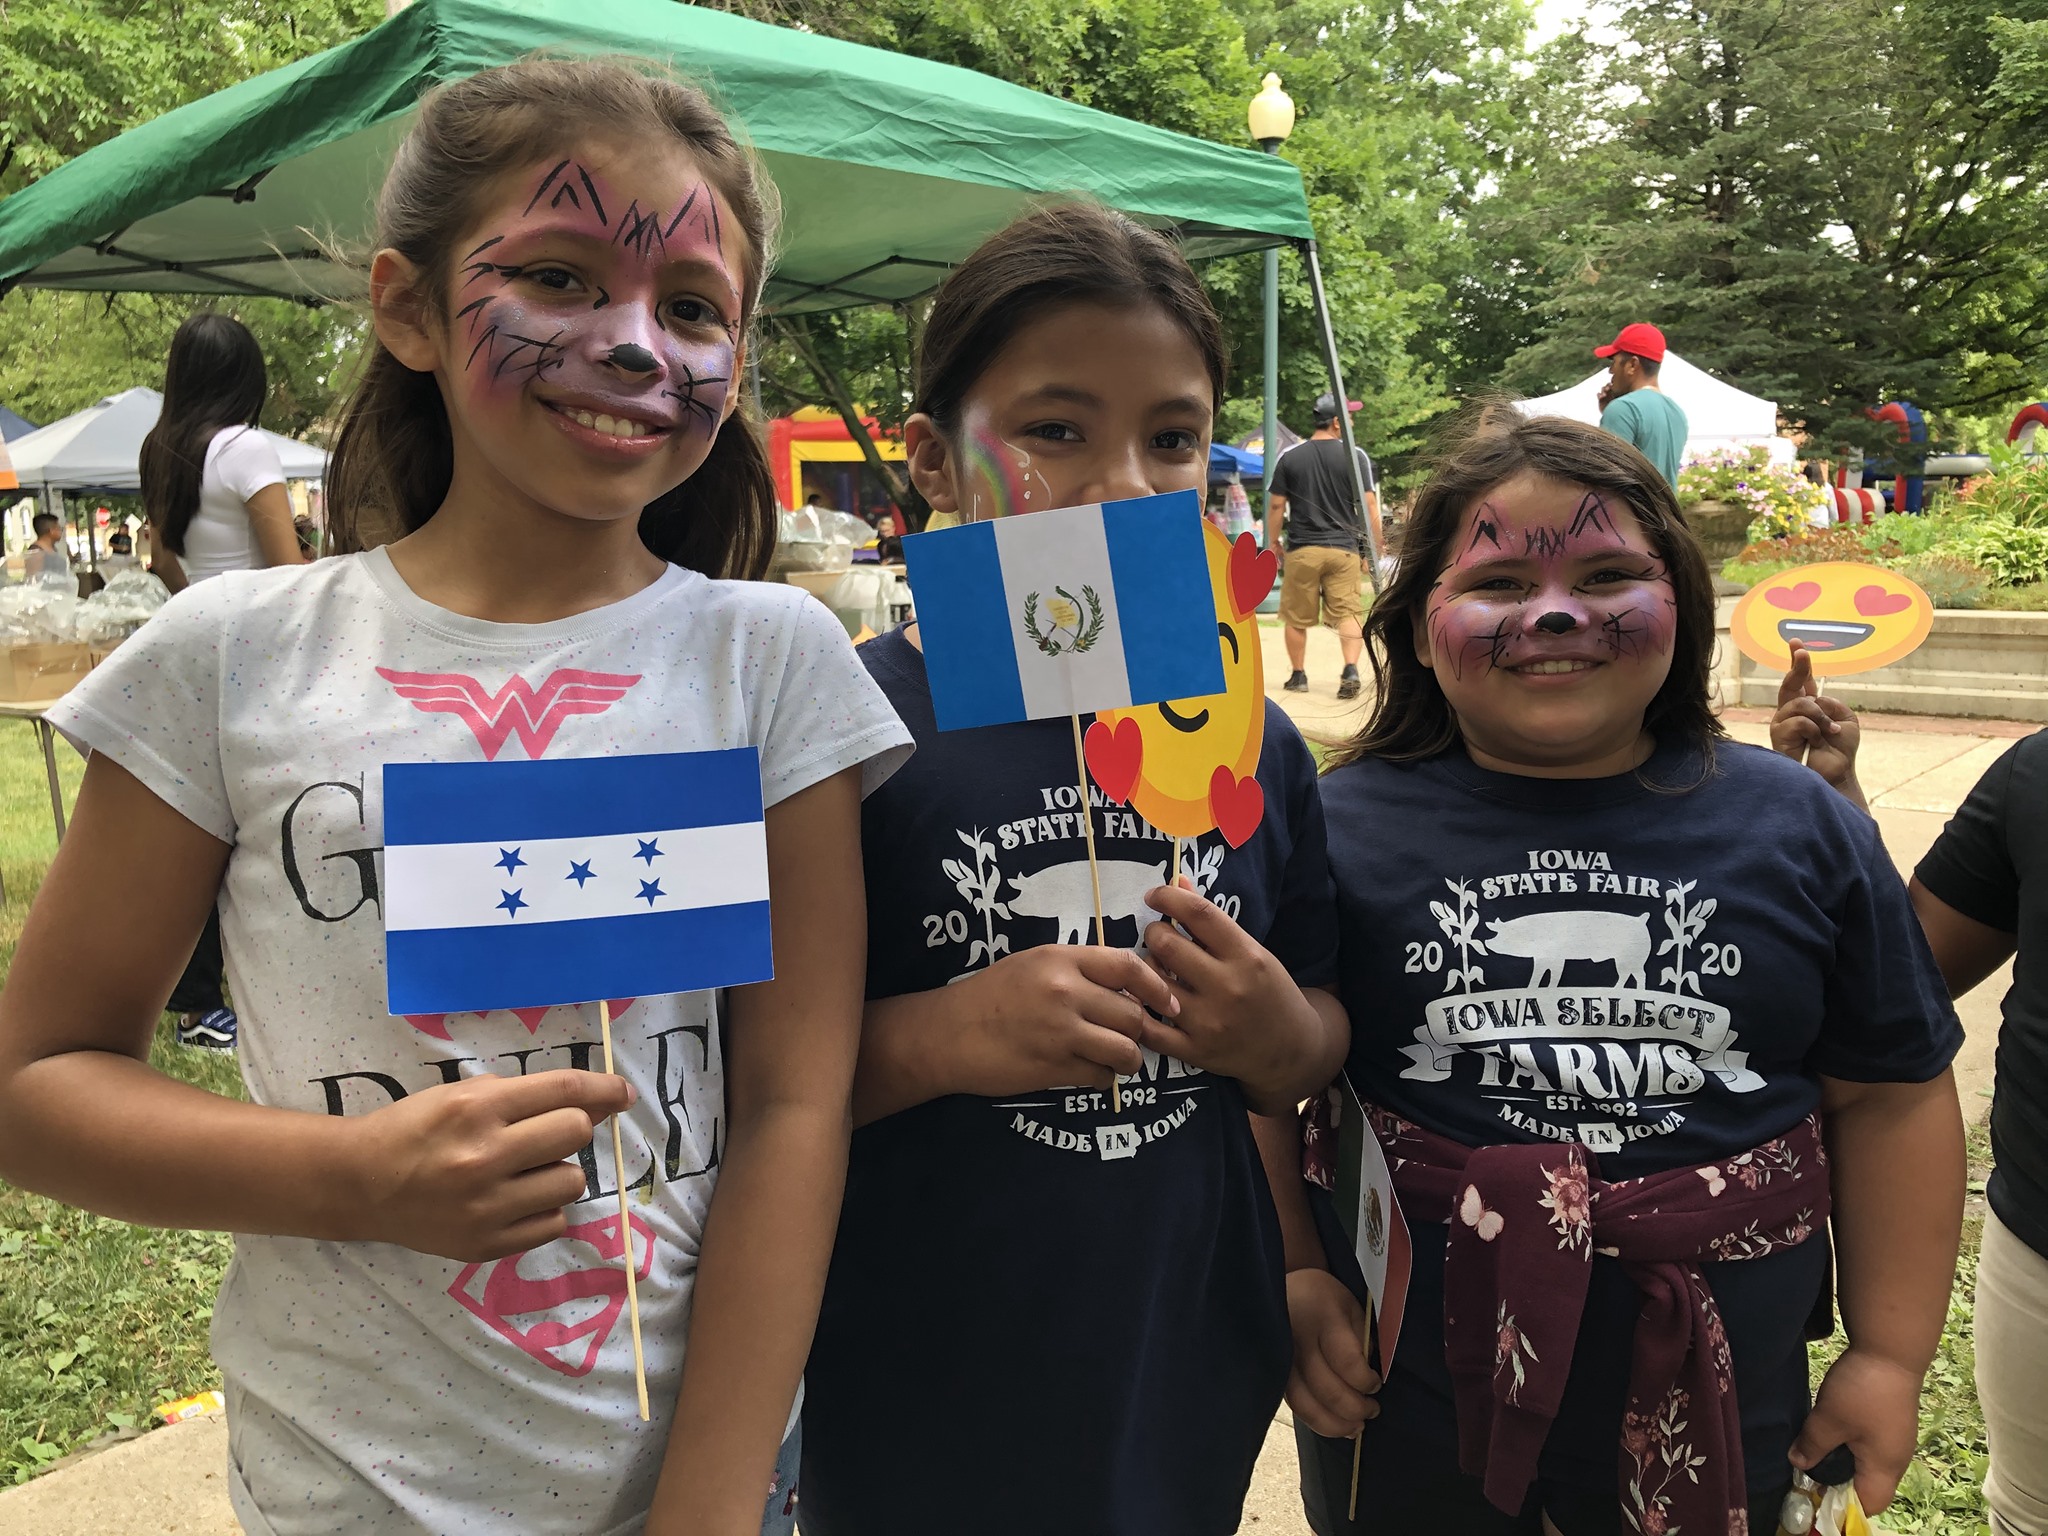 Three young people with facepaint and flags smile for the camera